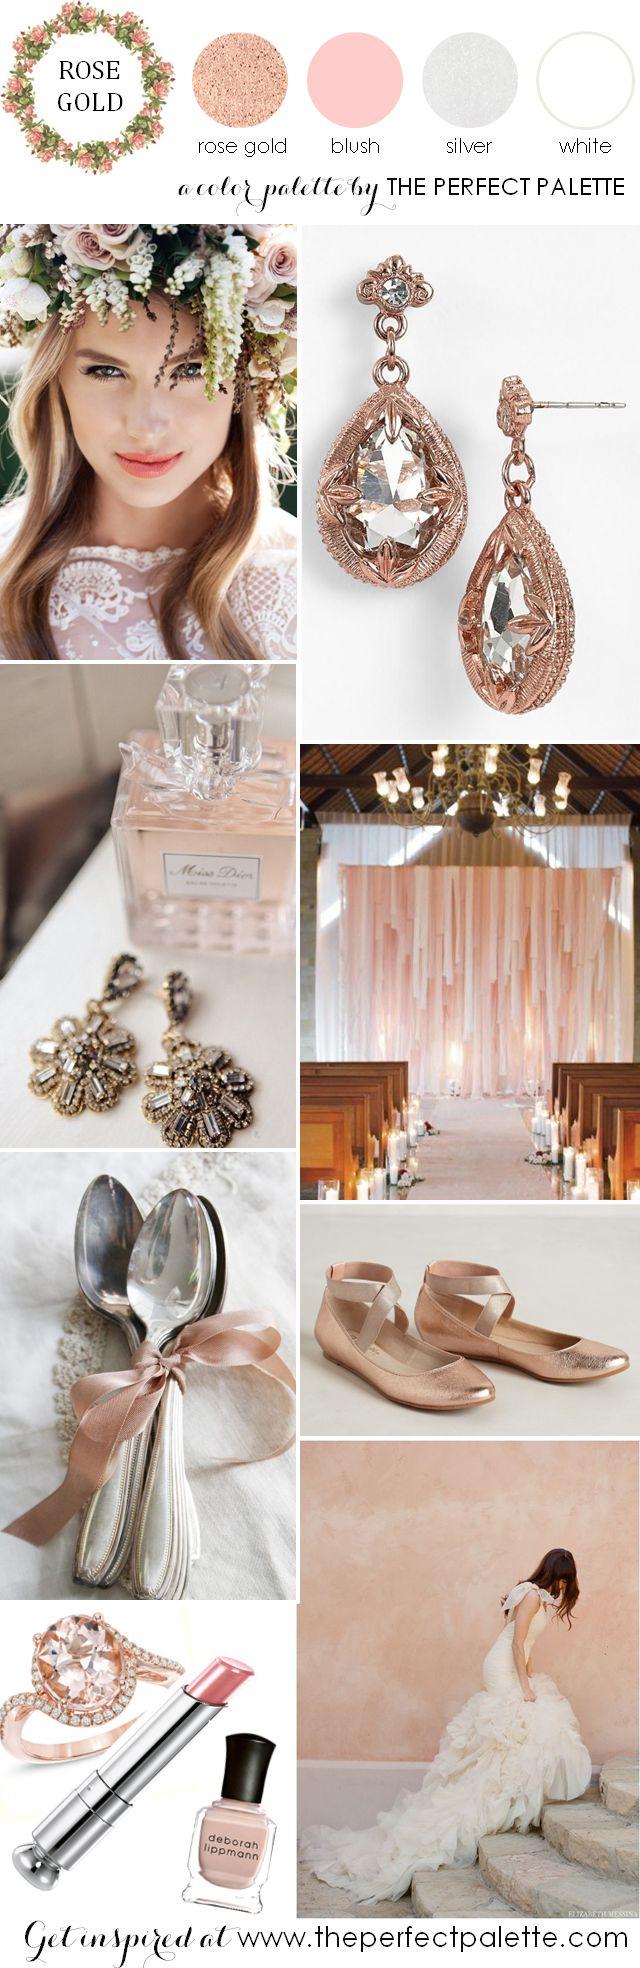 Mariage - Now Trending: Rose Gold And Blush Wedding Ideas